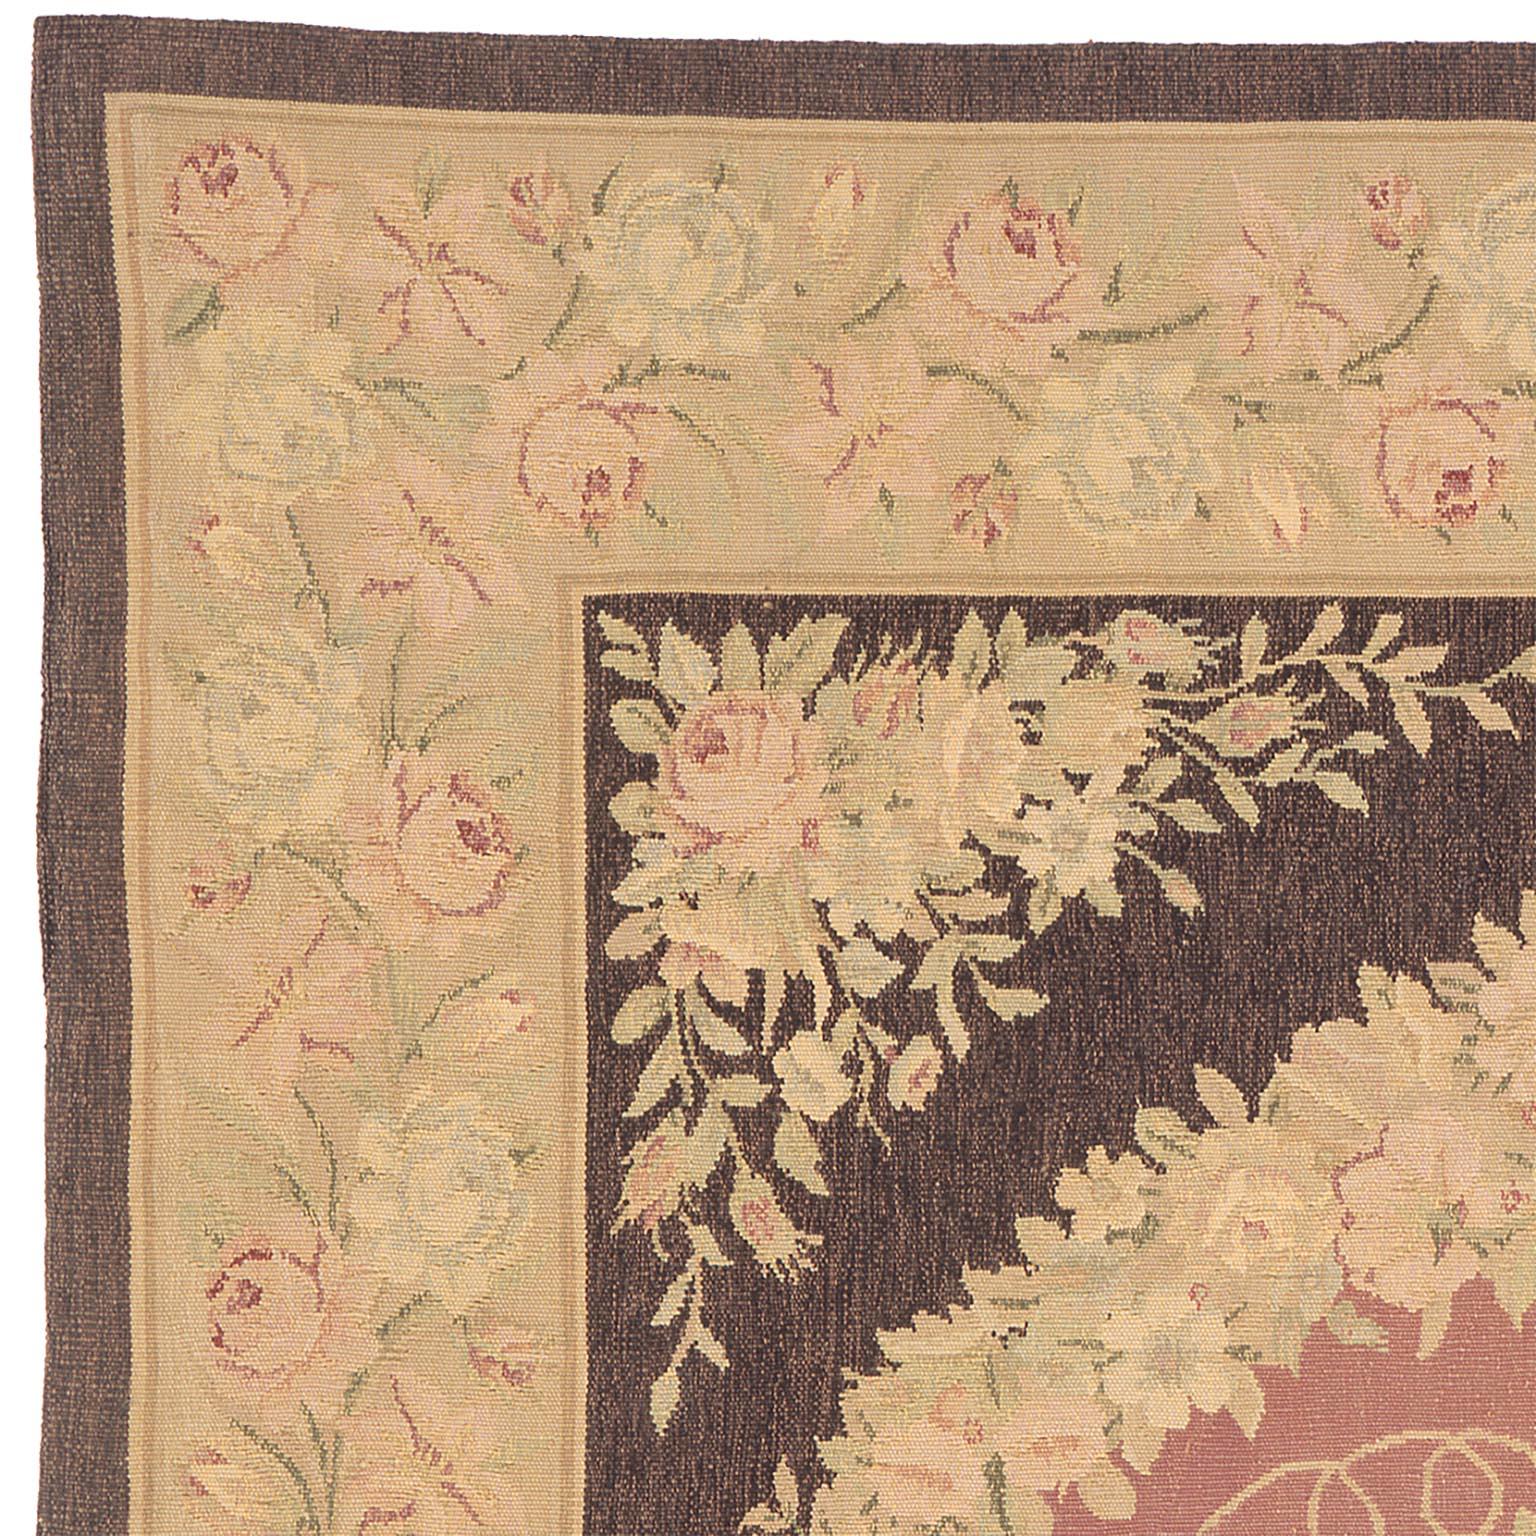 Vintage French Aubusson rug
Beigh and purple design
Floral border with center medallion
1920

FJ Hakimian #2627.